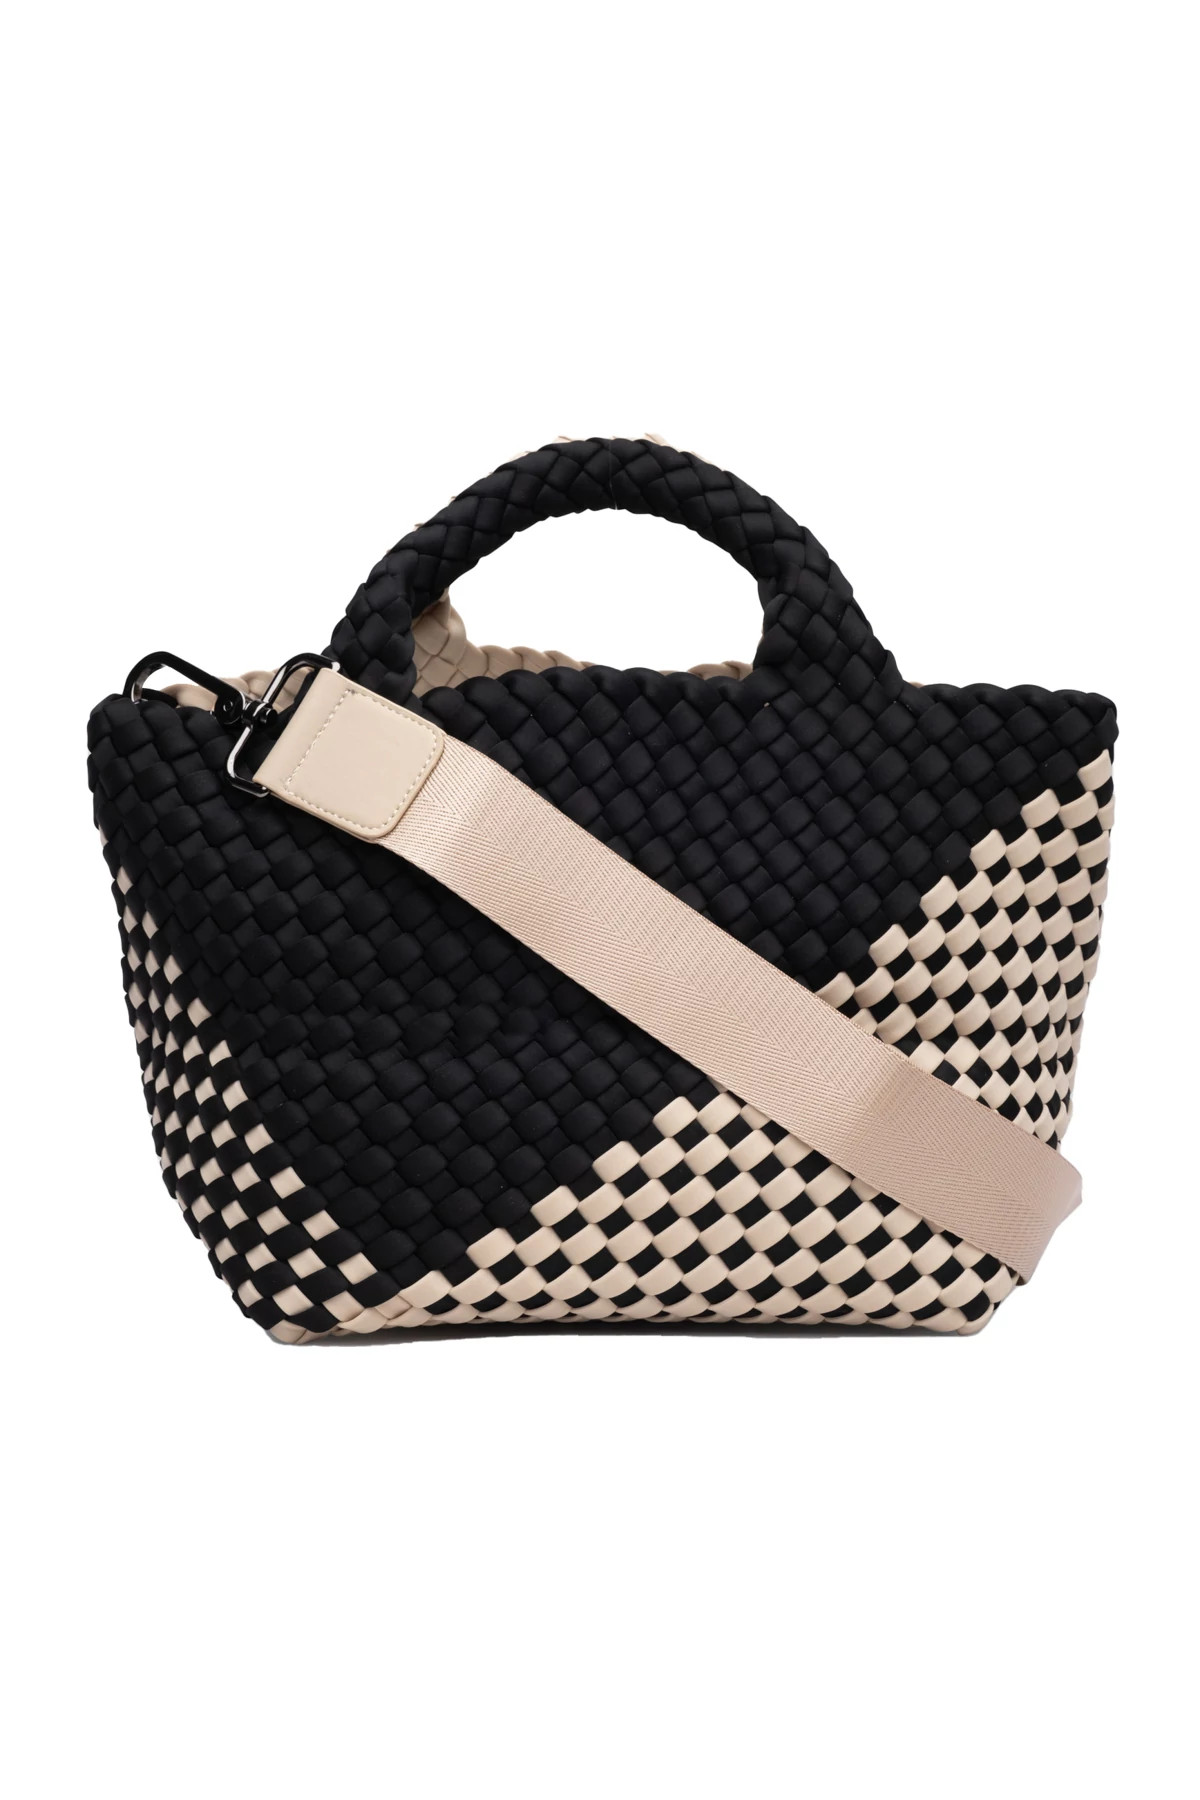 INDIO St. Barths Handwoven Mini Tote image number 1